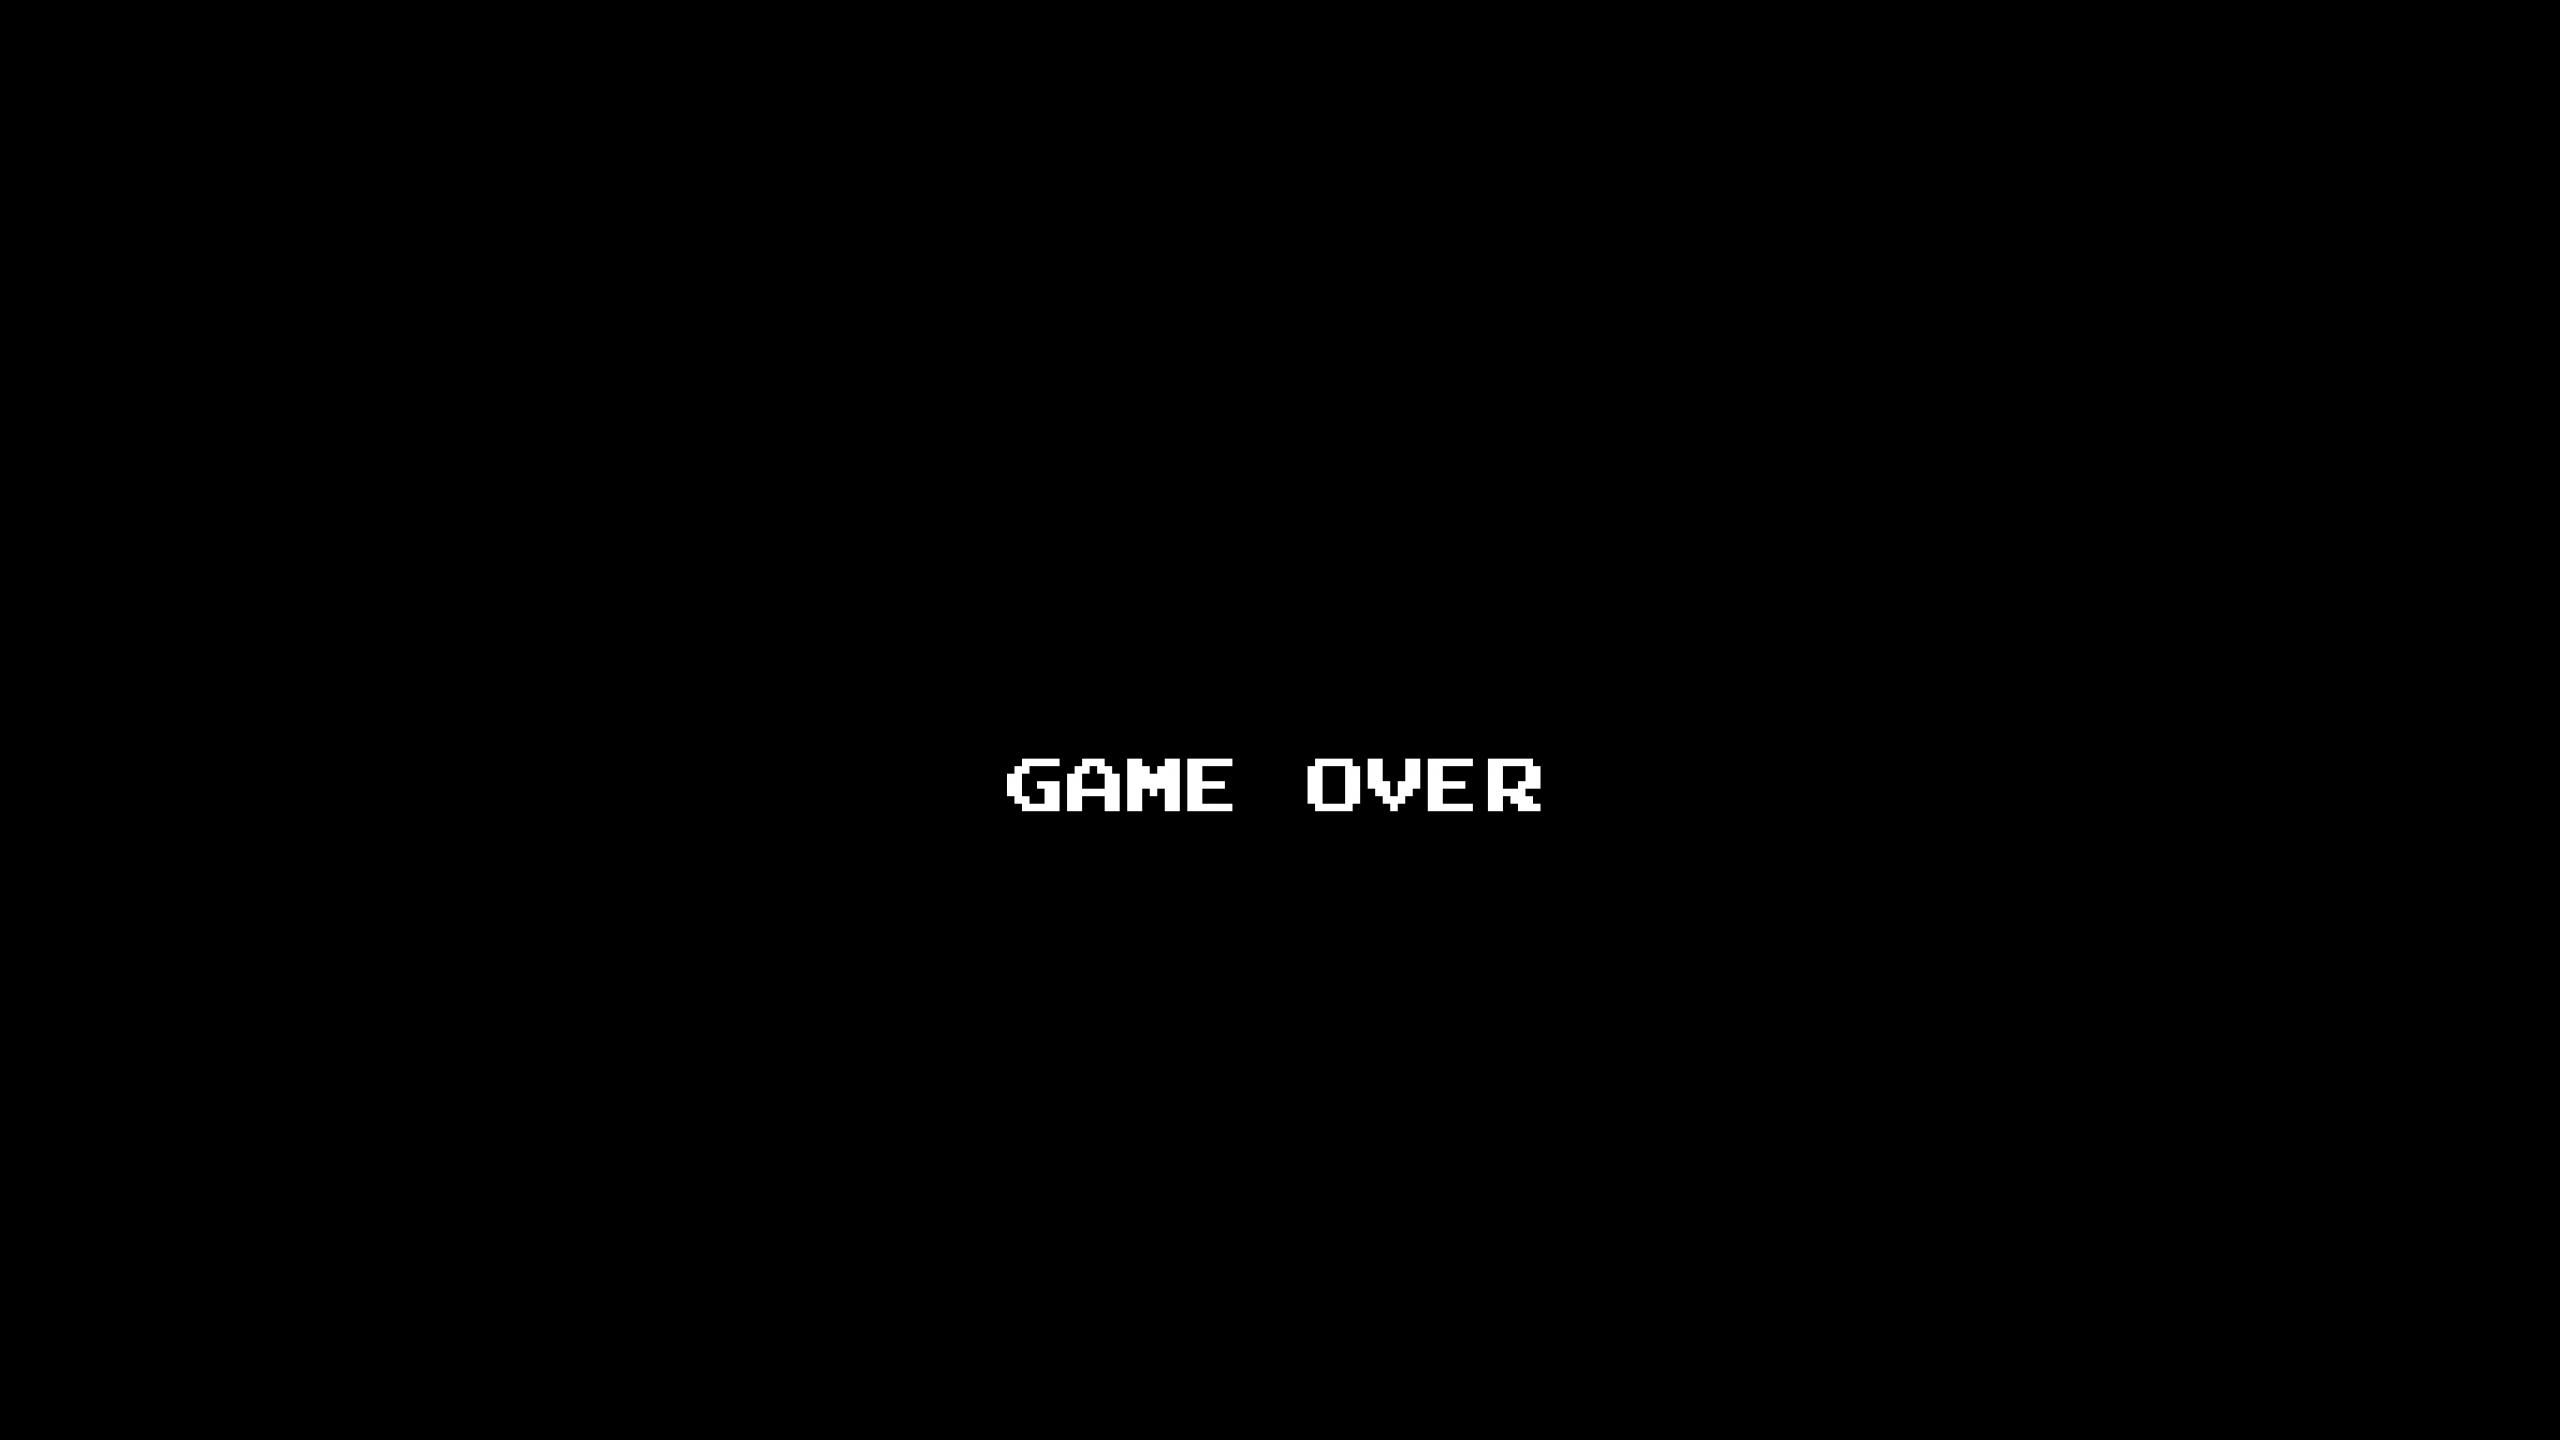 Game Over Wallpaper. Game Wallpaper, PC